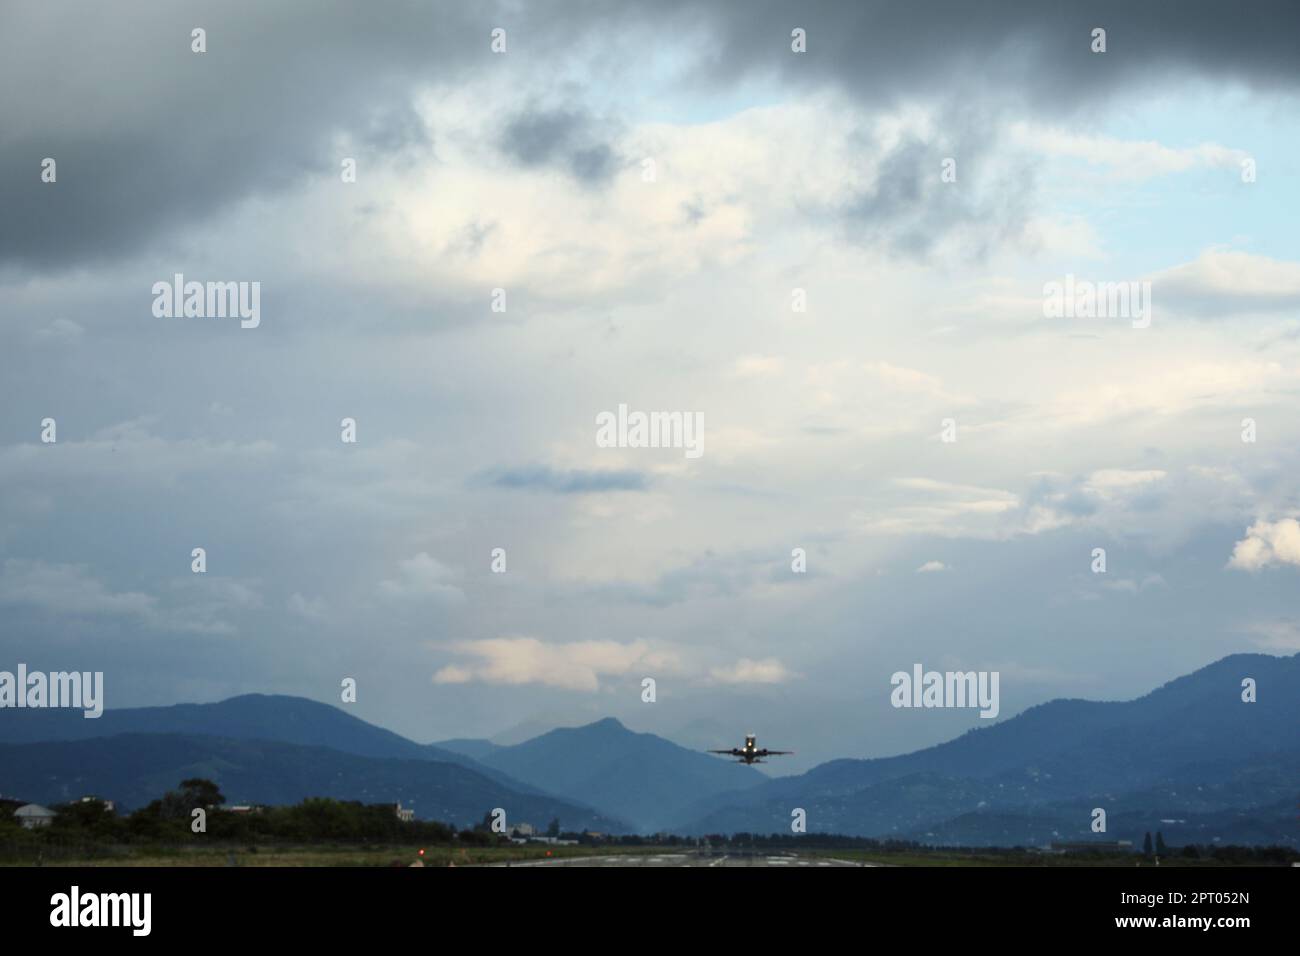 Modern white airplane and takeoff runway in evening Stock Photo